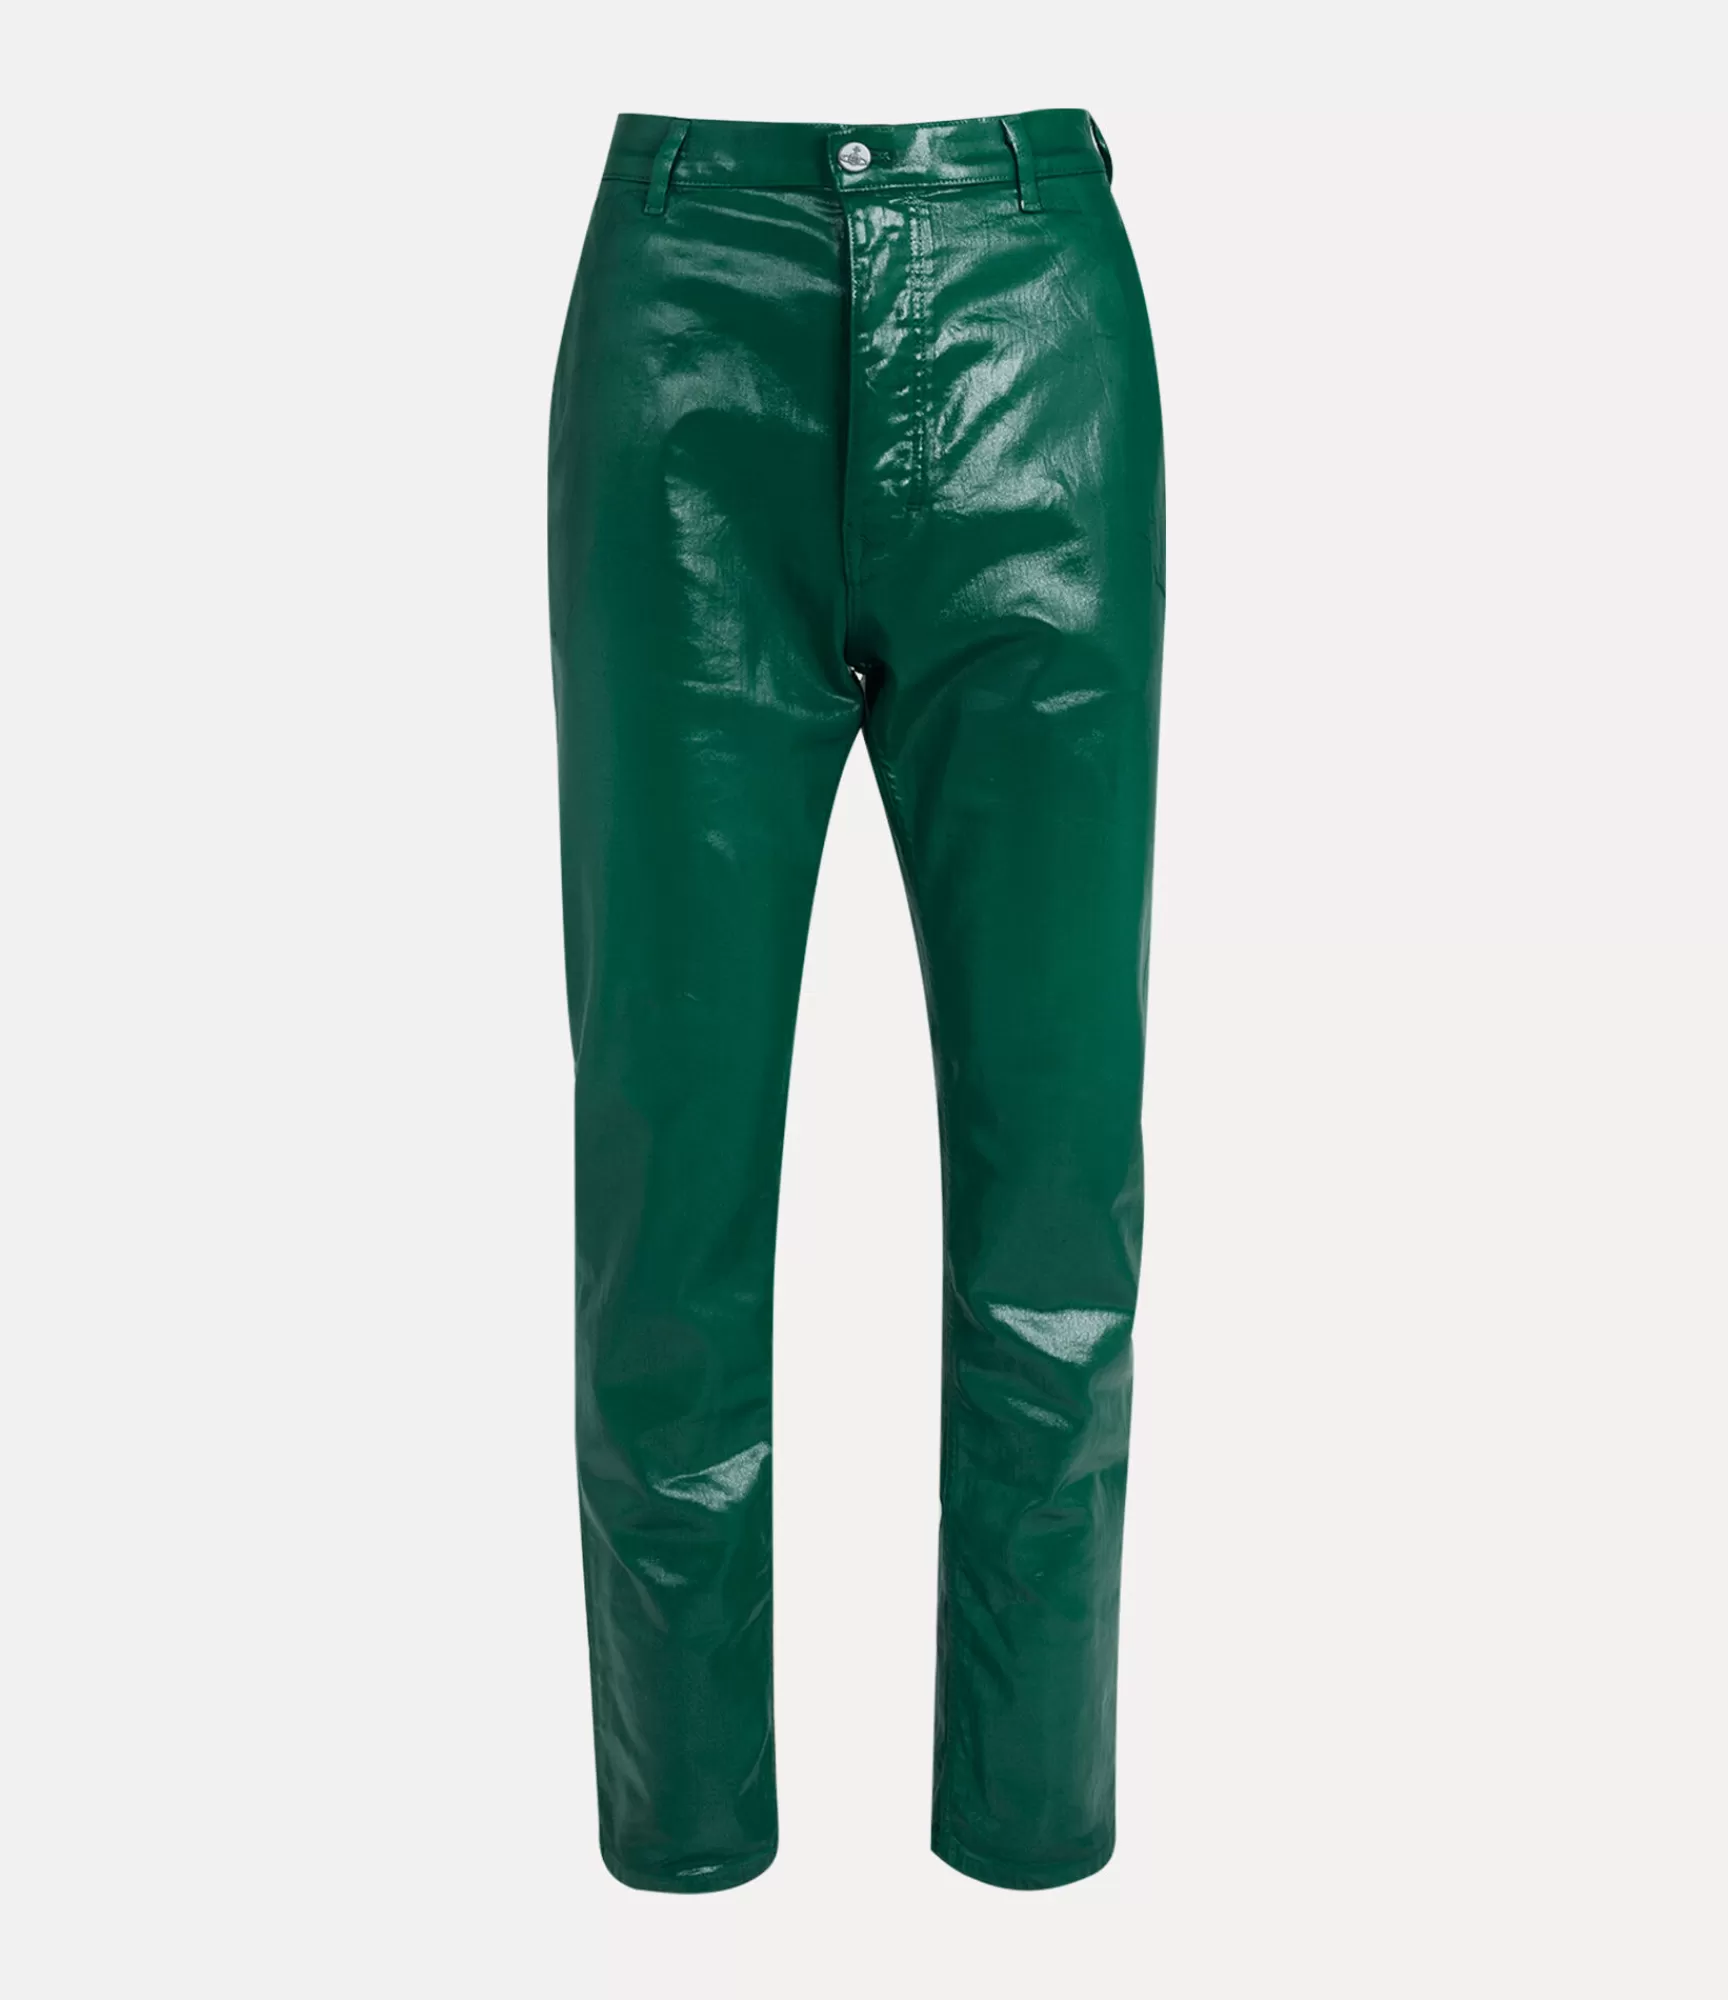 Vivienne Westwood Trousers and Shorts*M cruise trousers Green